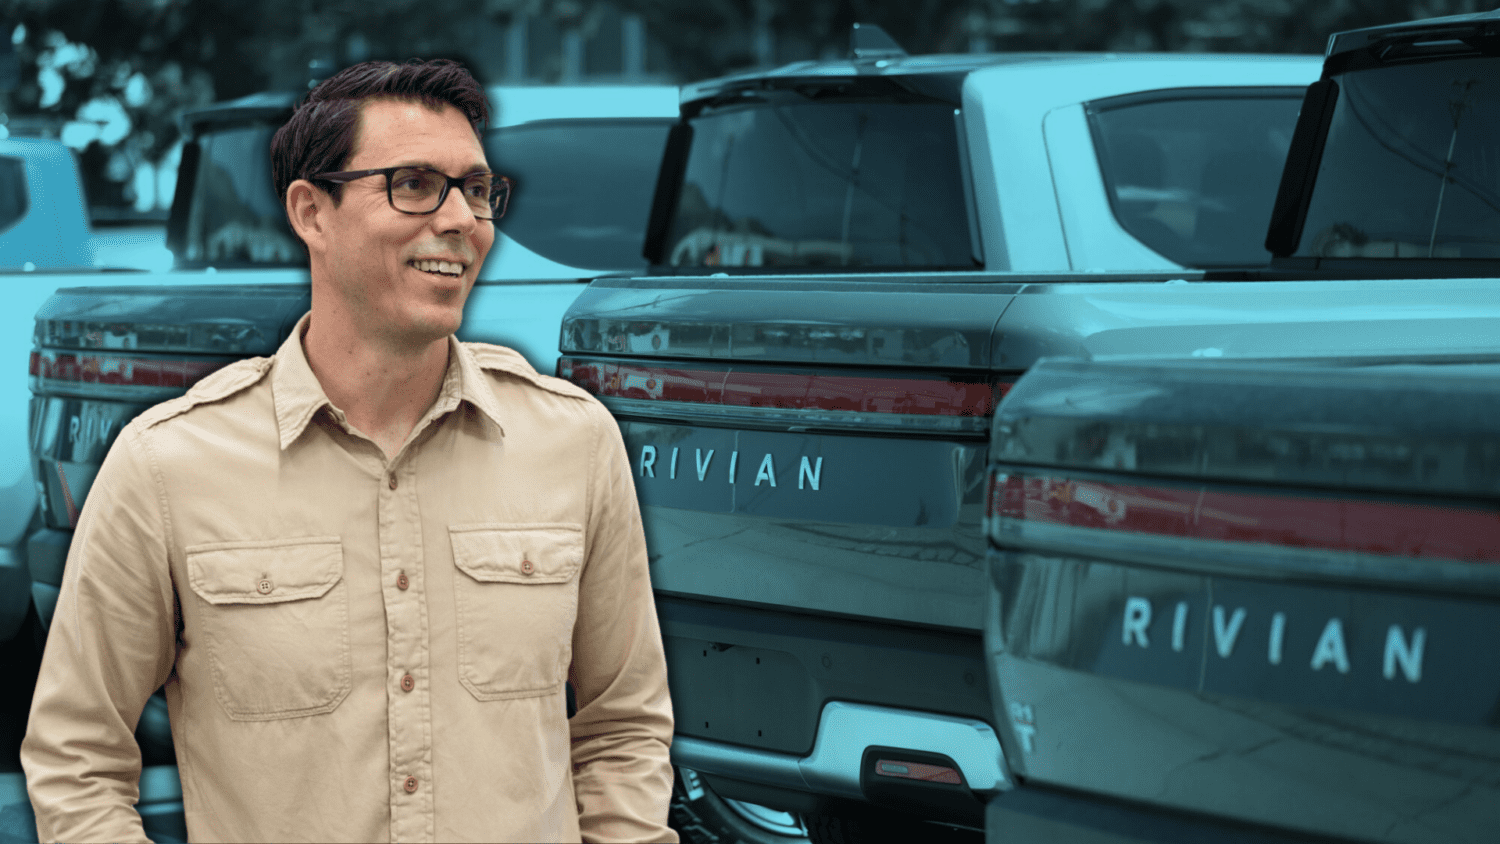 Rivian announced on November 20 that CEO RJ Scaringe would take direct control of all product development, effective immediately.